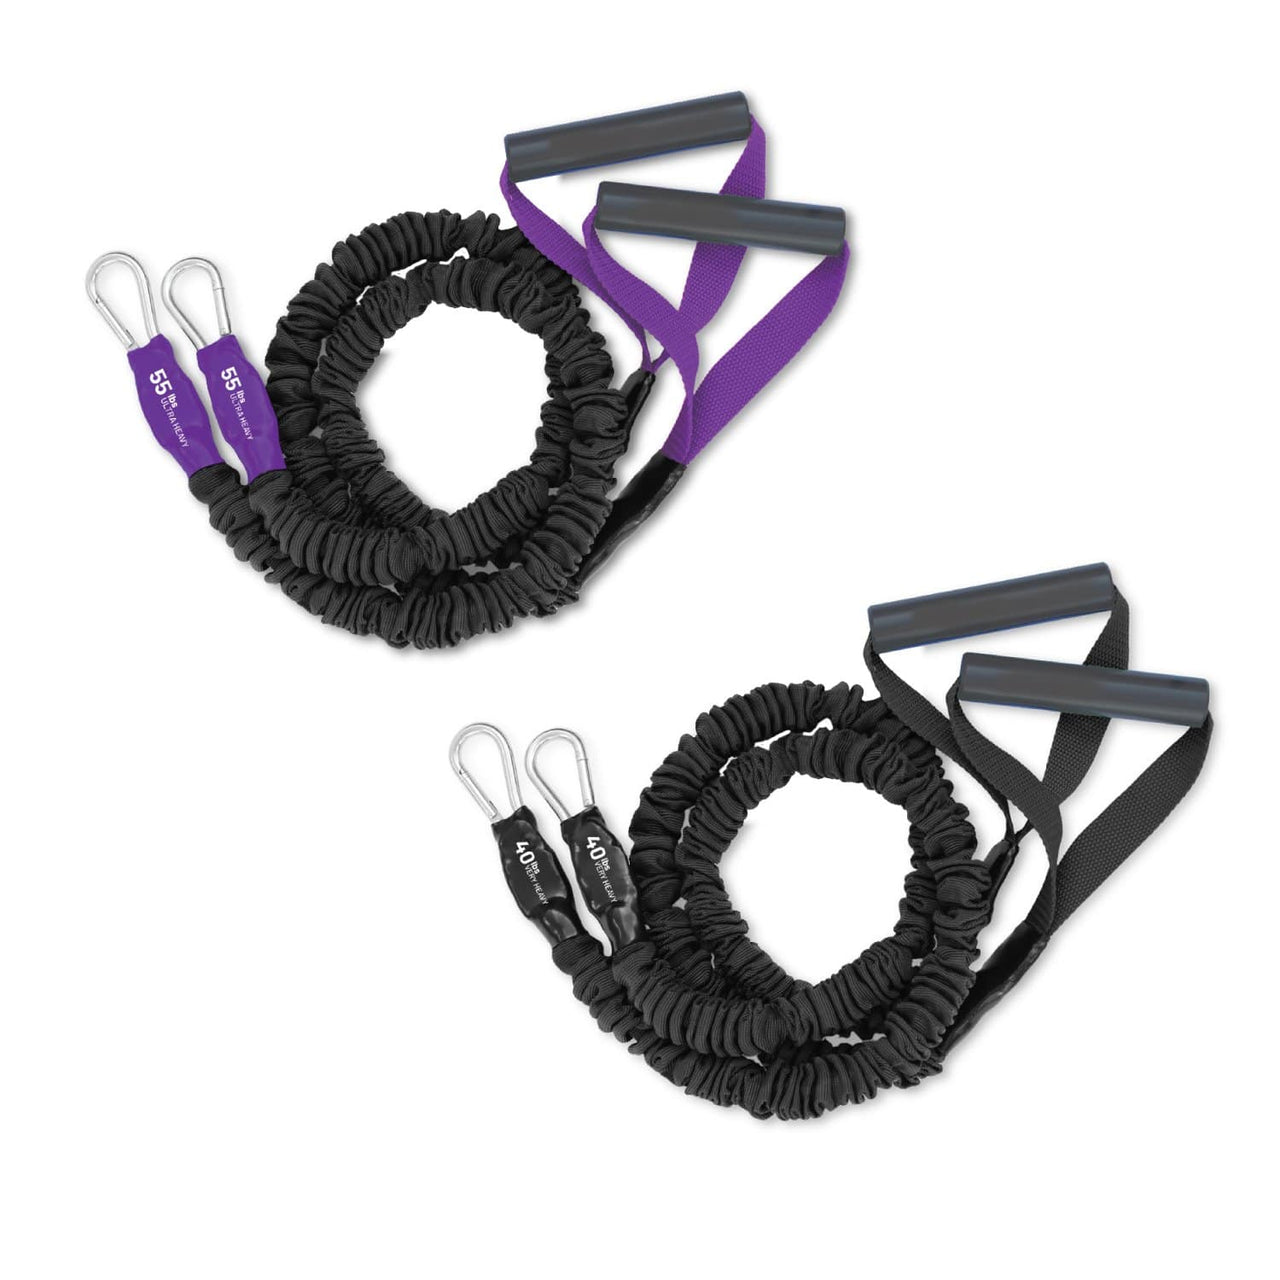 X-Over Resistance Bands™ - 2 Pack